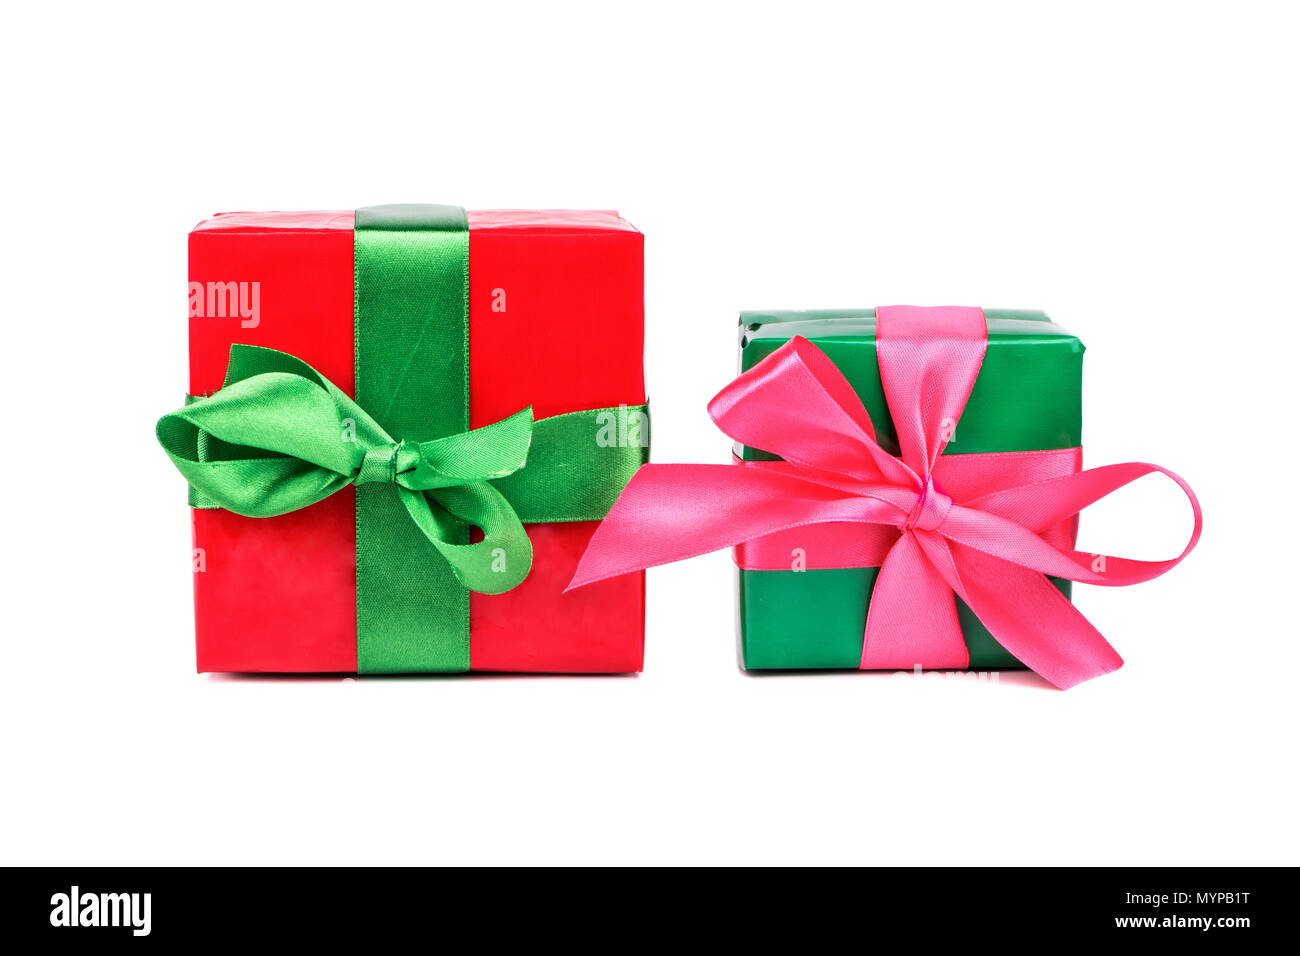 Big Green And Red Bows For Gift Wrapping Isolated On White Background.  Stock Photo, Picture and Royalty Free Image. Image 154789143.